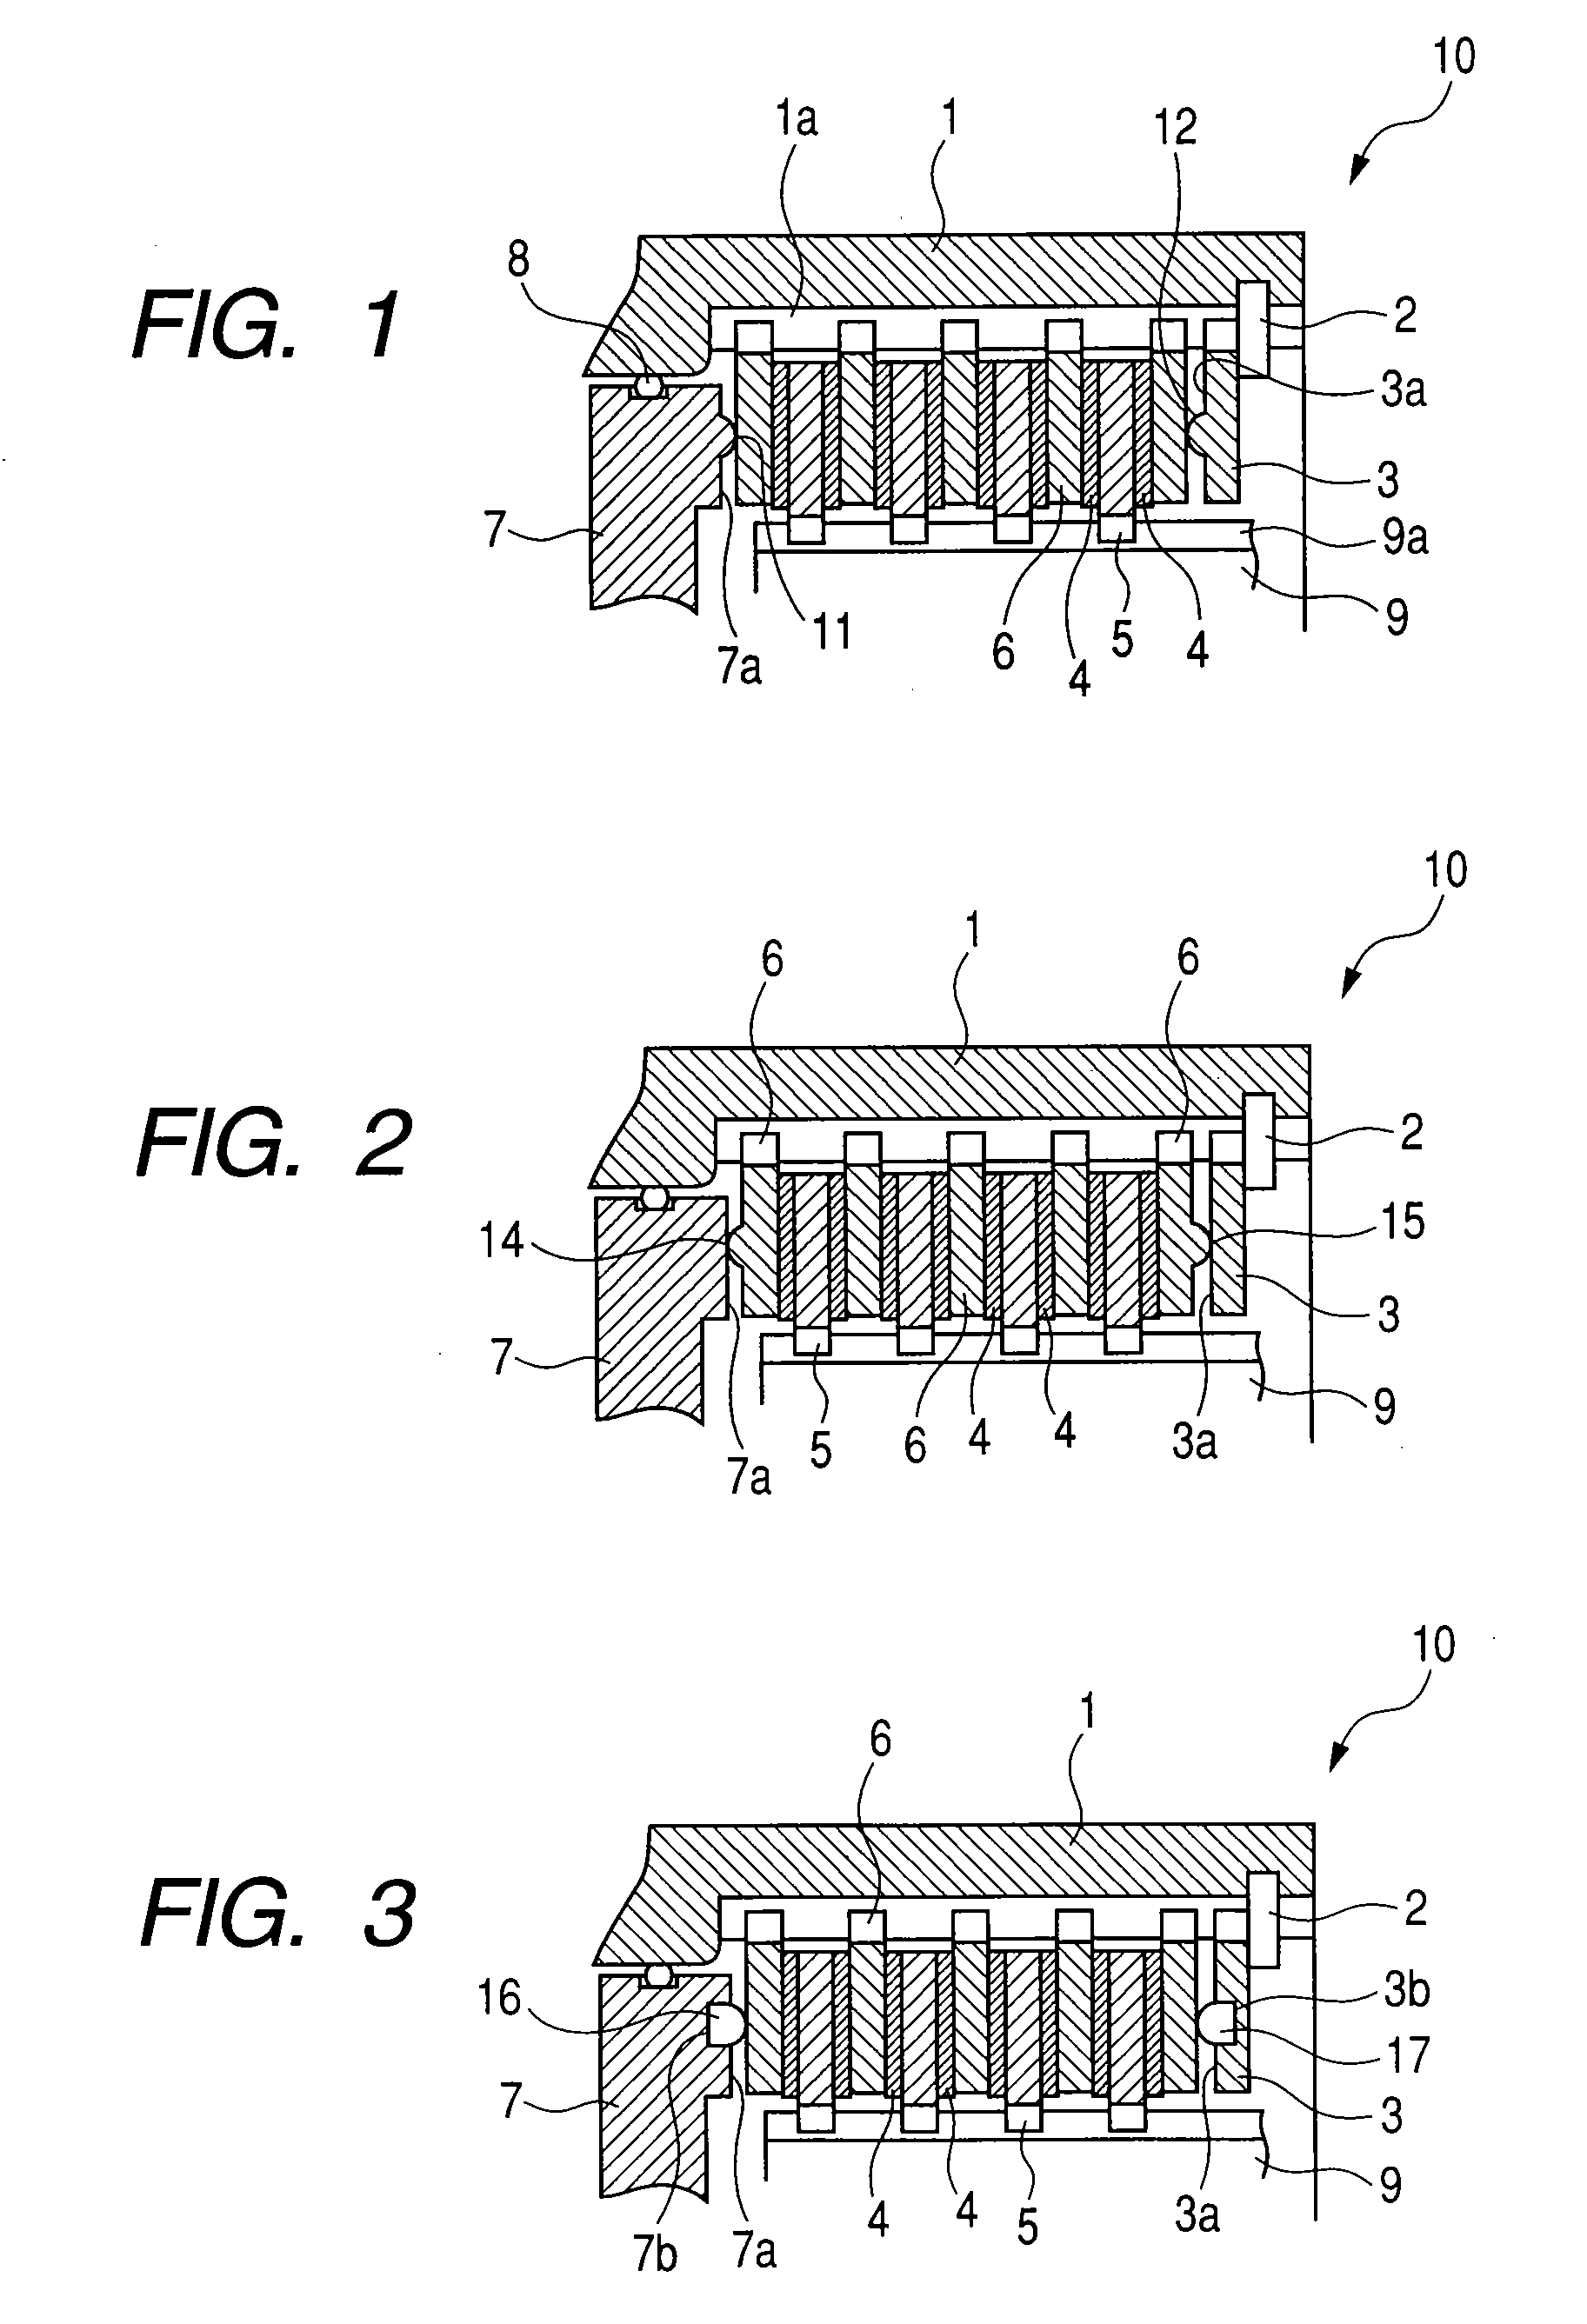 Wet-type multi-plate friction engaging apparatus